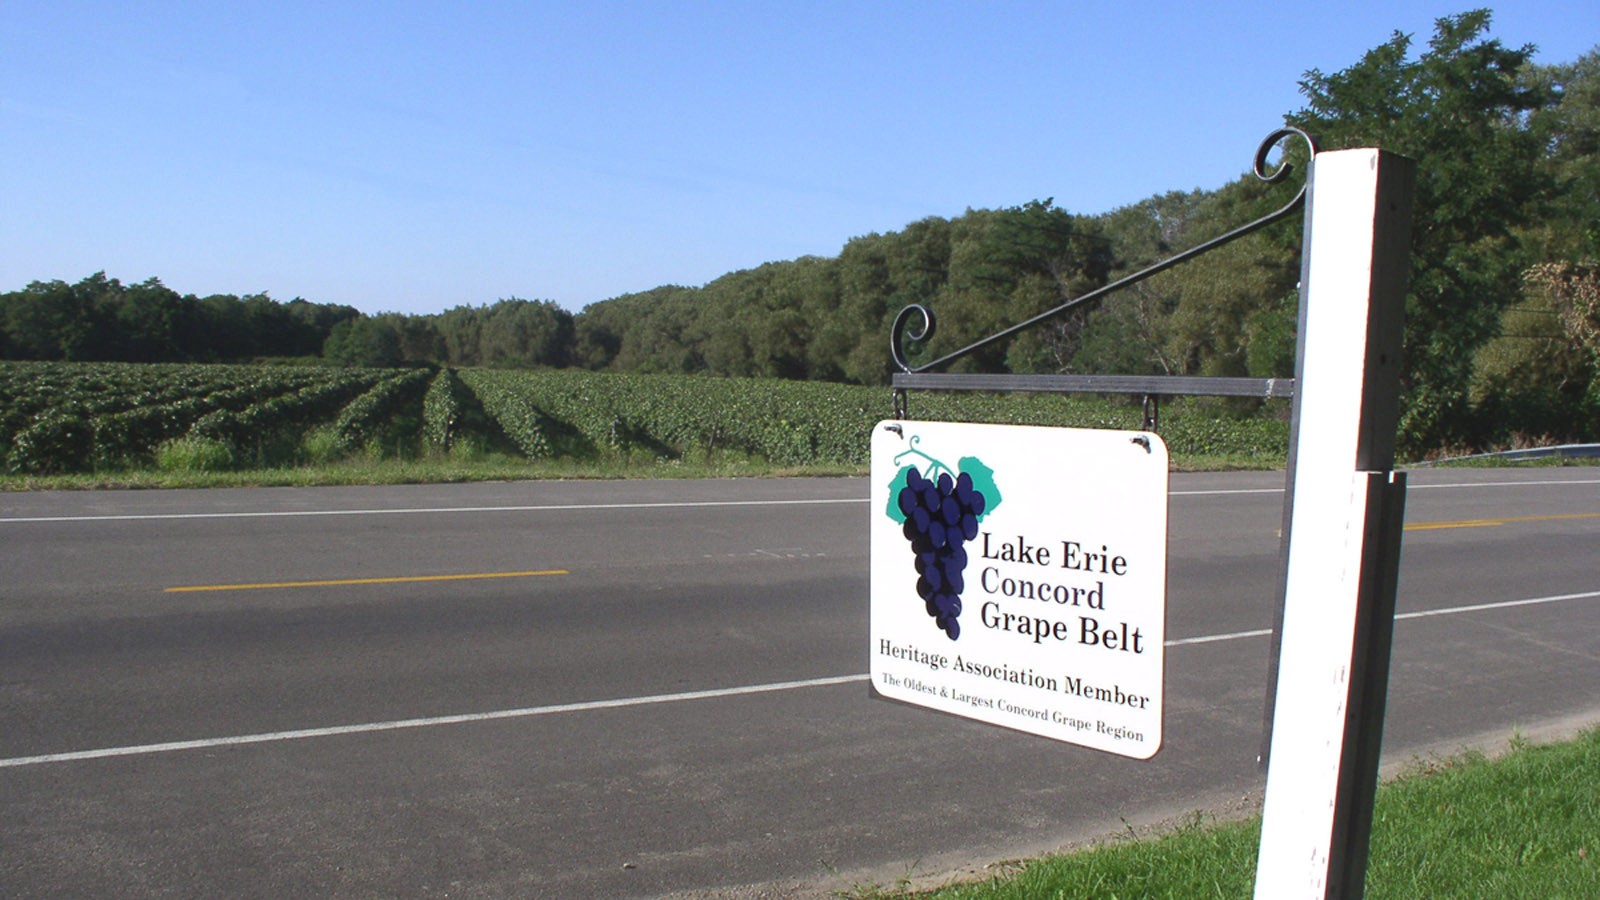 The Lake Erie Concord Grape Belt, Chautaqua County, NY. A sign across the street from a vineyard proudly proclaims a grower's membership in the Lake Erie Concord Grape Belt Heritage Association - Photo courtesy Duncan Hilchey